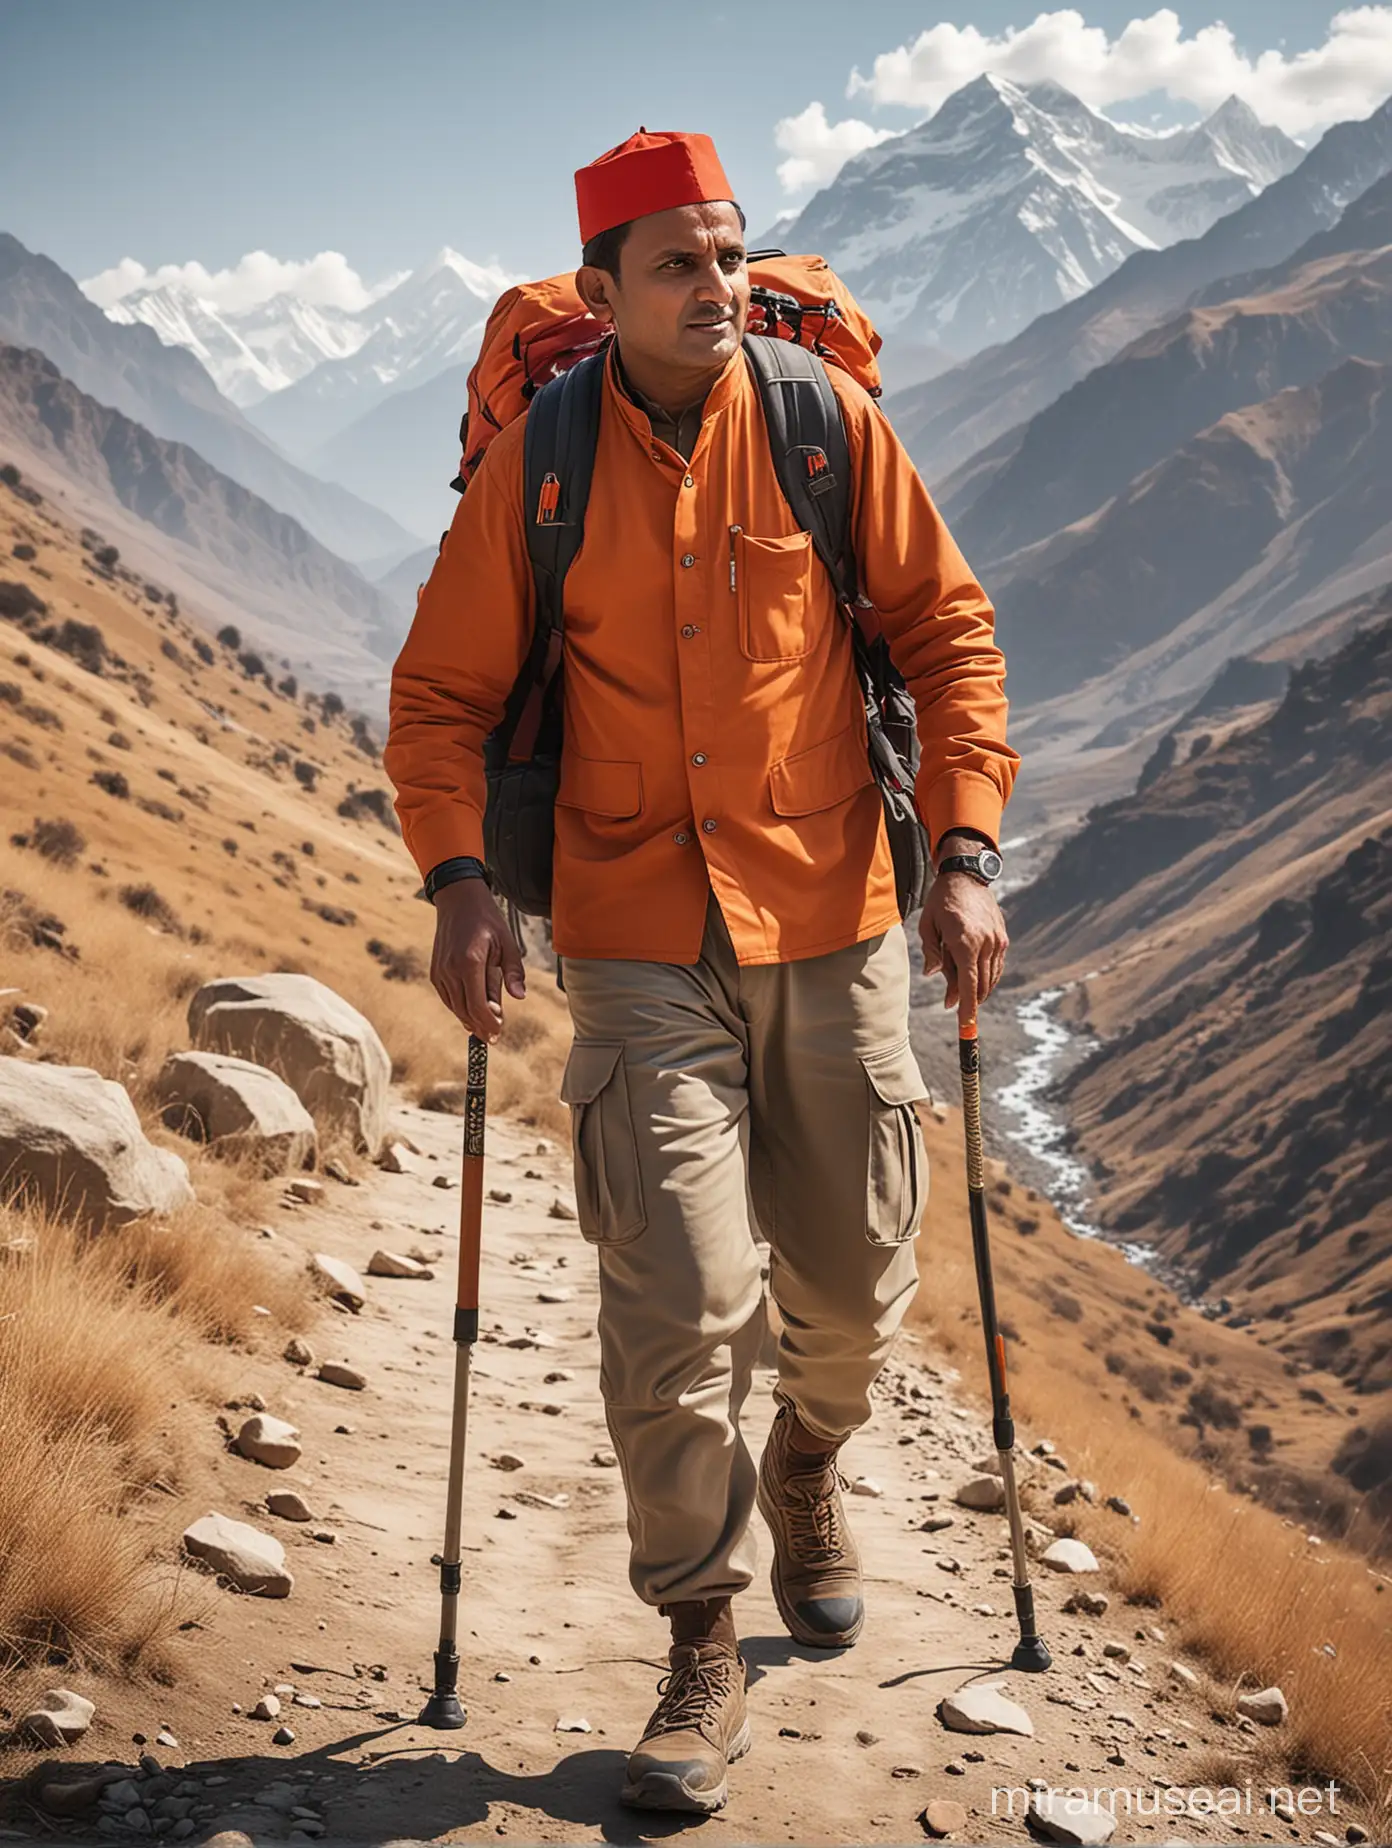 Create a realistic AI image of the uttar pradesh former chief minister akhilesh yadav going for trekking in the Himalayas. Show the akhilesh yadav dressed in trekking attire, wearing a orange backpack, red color gandhi topi and carrying a trekking pole. Include a orange water bottle hanging from the backpack, indicating preparedness for the trek. Capture the majestic Himalayan landscape in the background, emphasizing the adventurous spirit and love for nature